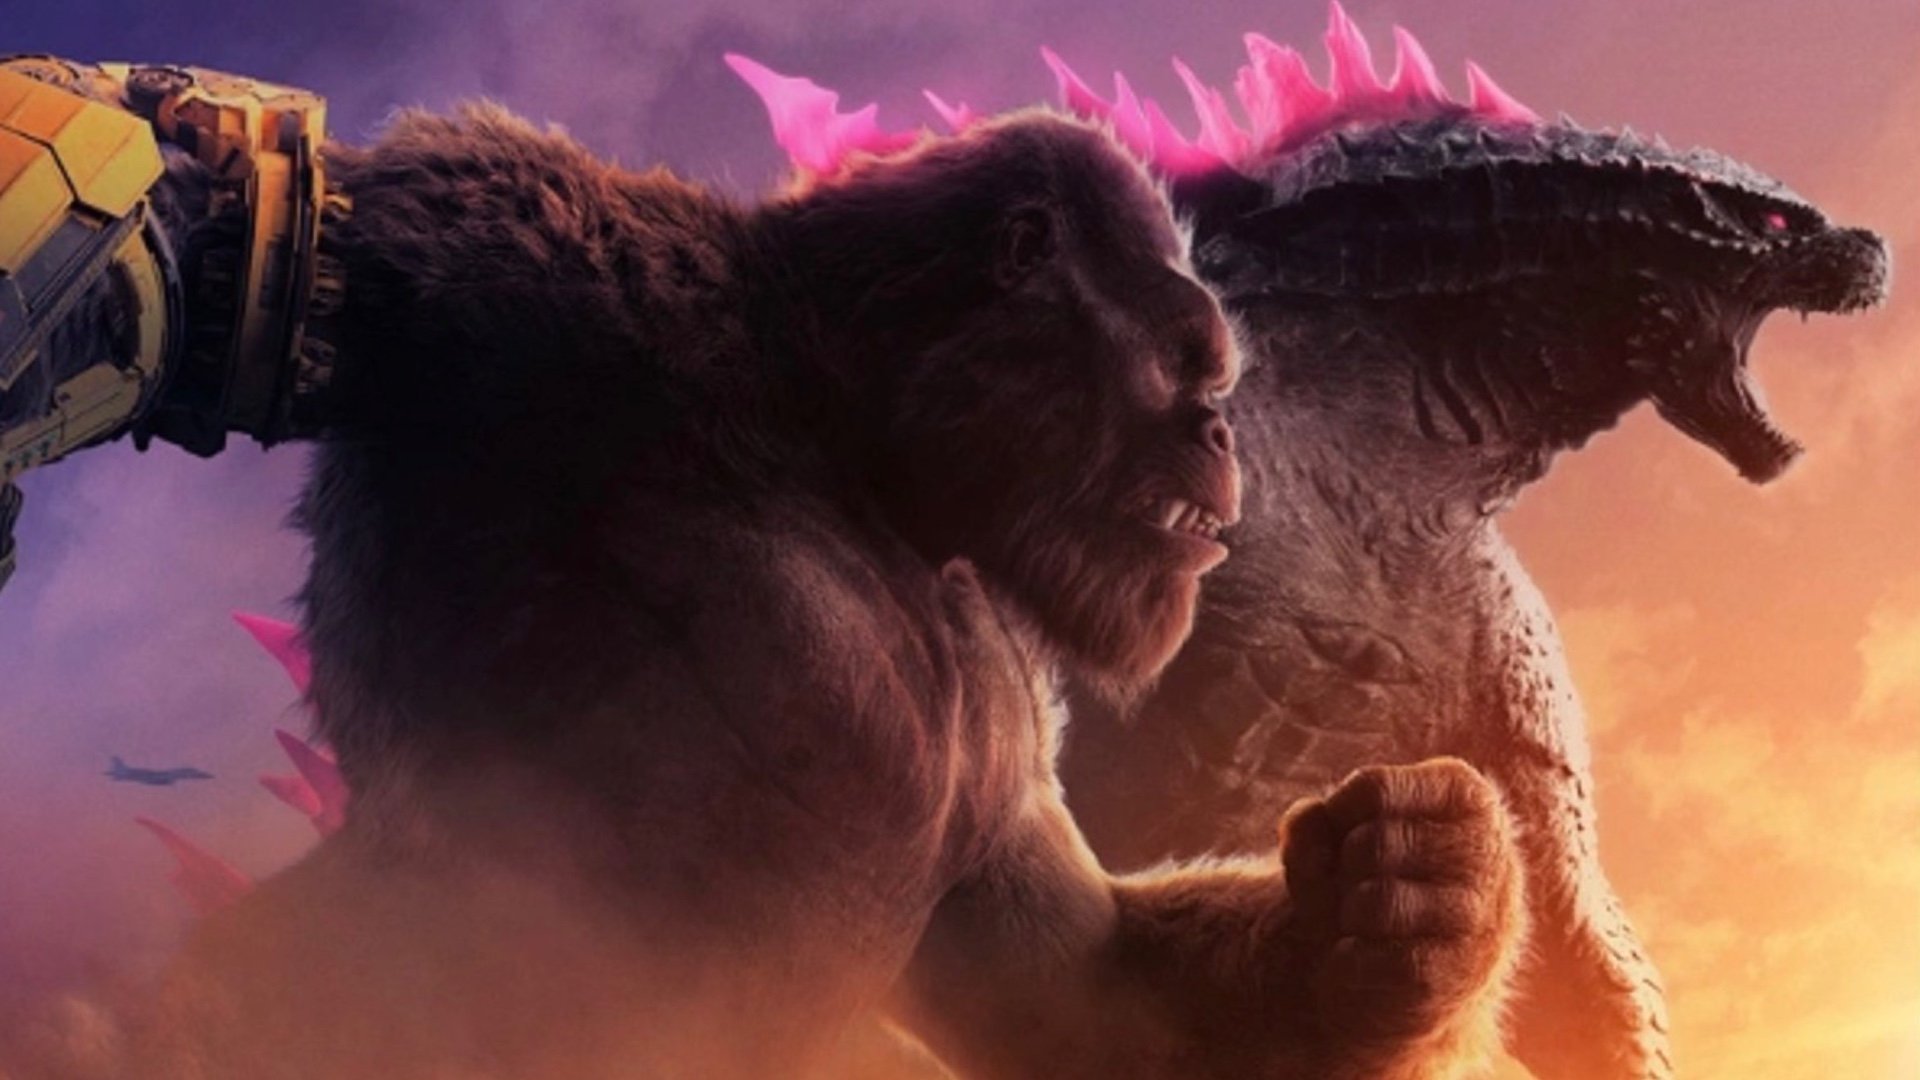 final-trailer-for-godzilla-x-kong-the-new-empire-it-has-all-led-to-this.jpg